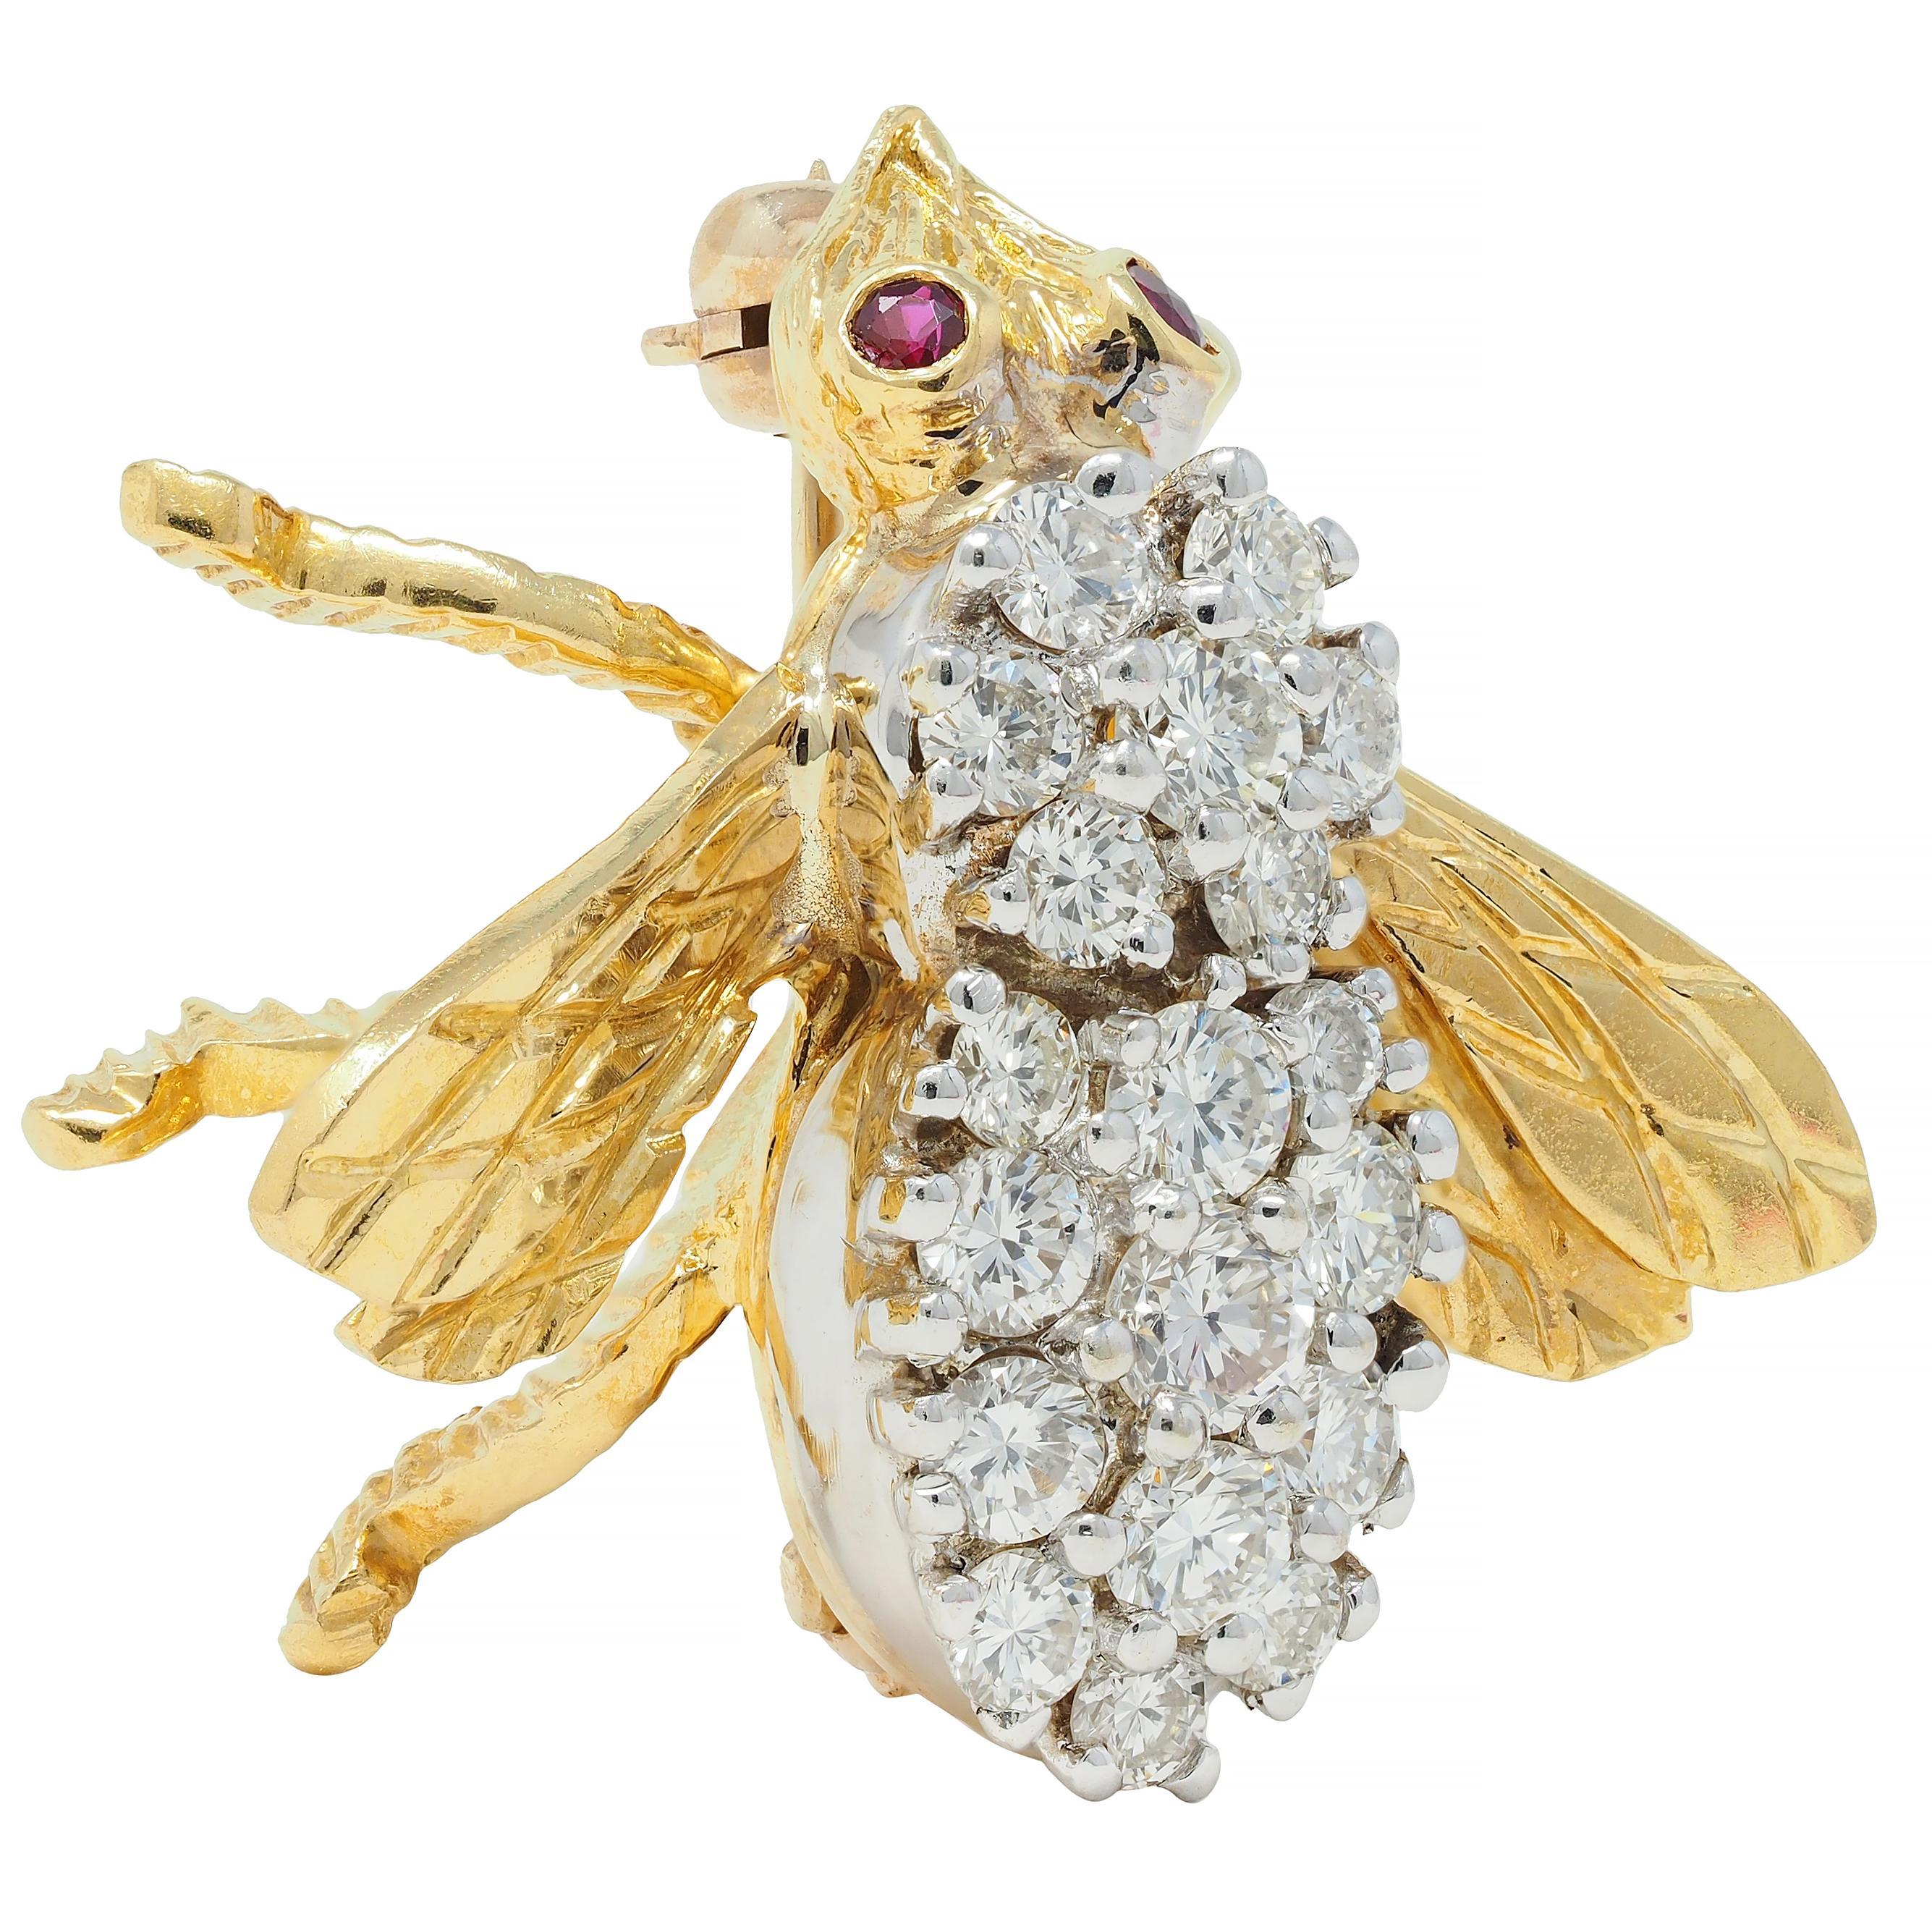 Designed as a stylized bee with deeply engraved wings and textured legs
With round cut ruby eyes - transparent purplish red in color
Weighing approximately 0.10 carat total - bezel set
With round brilliant cut diamonds bead set on body
Weighing